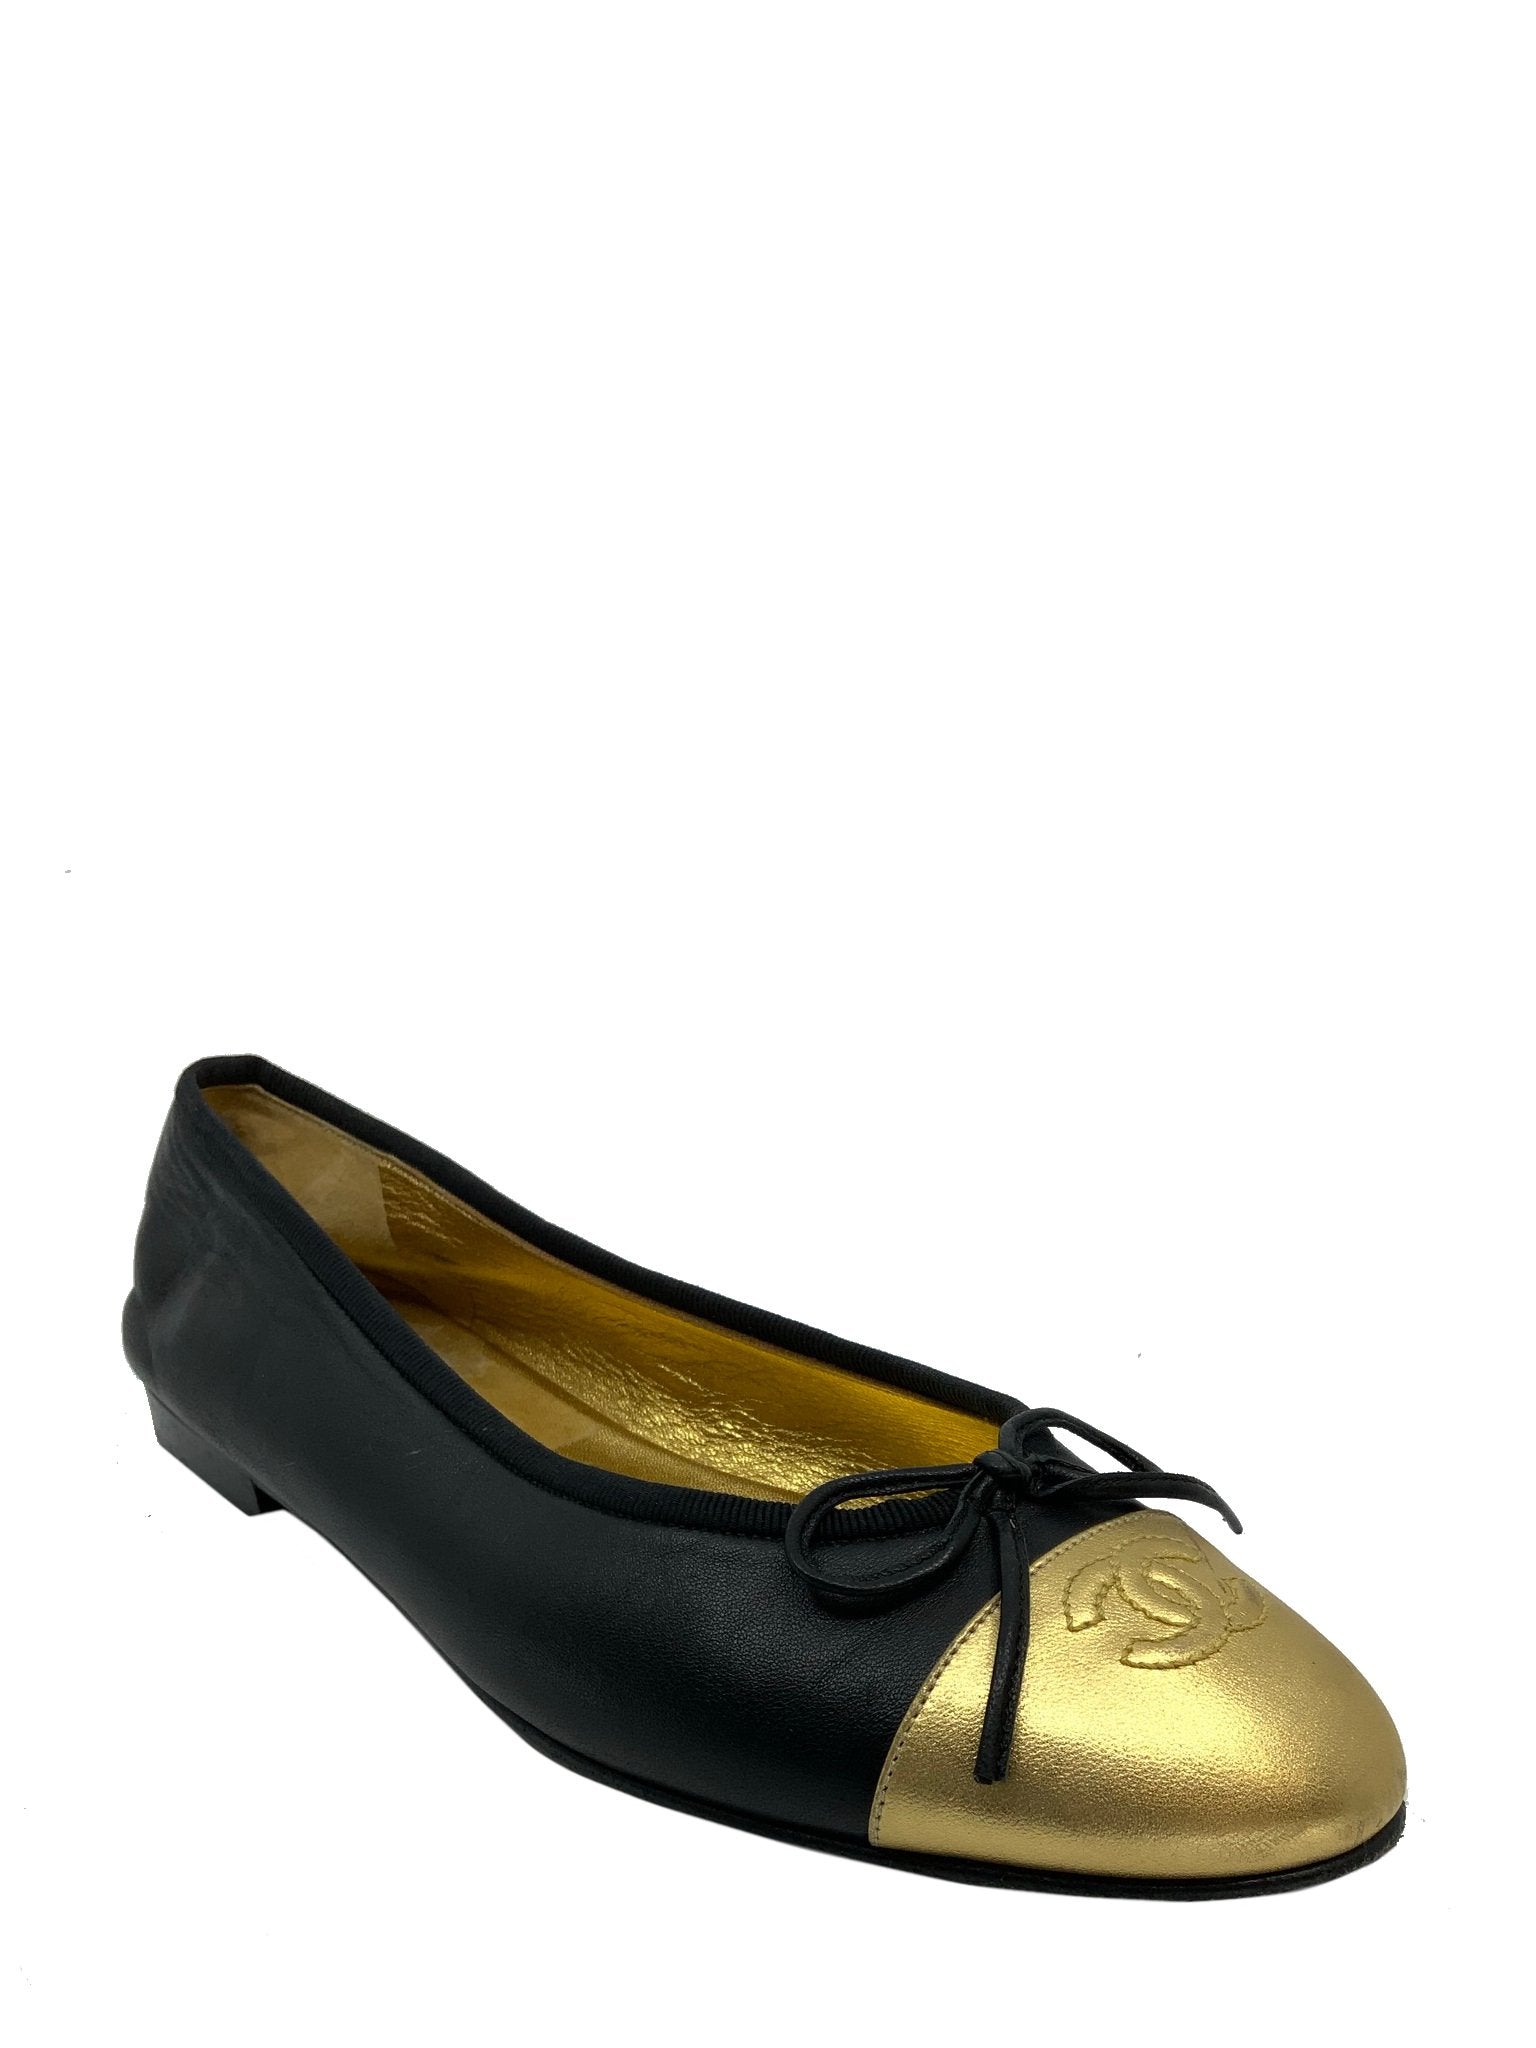 Chanel CC Cap Toe Lambskin Leather Ballet Flats Size 9 - Consigned